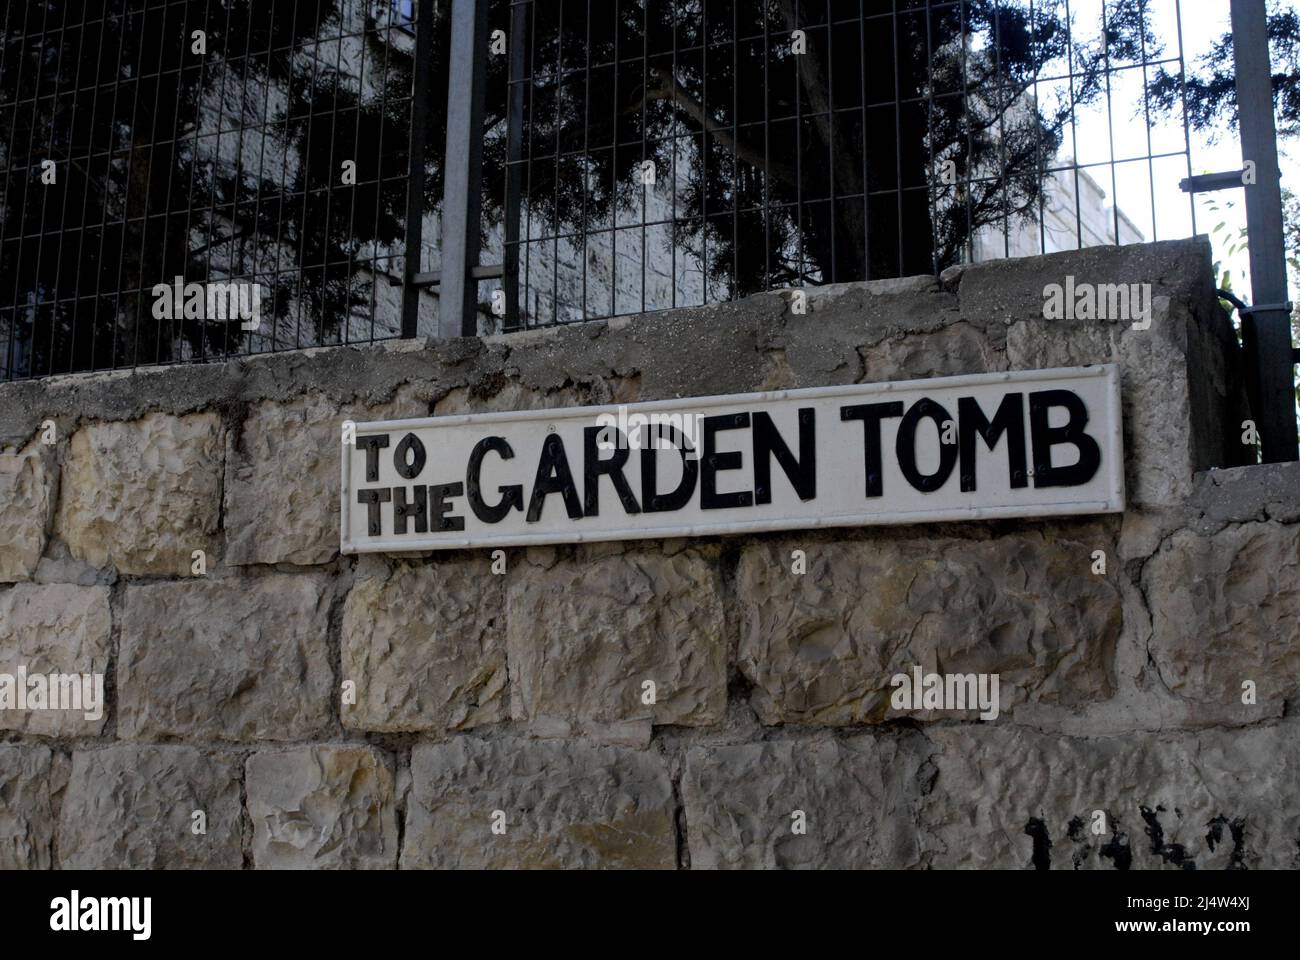 Garden tom beleave to be jesus was crucified and buried outside Jeruslame Israel Sept.4, 2007      (Photo by Francis Dean/Dean Pictures) Stock Photo